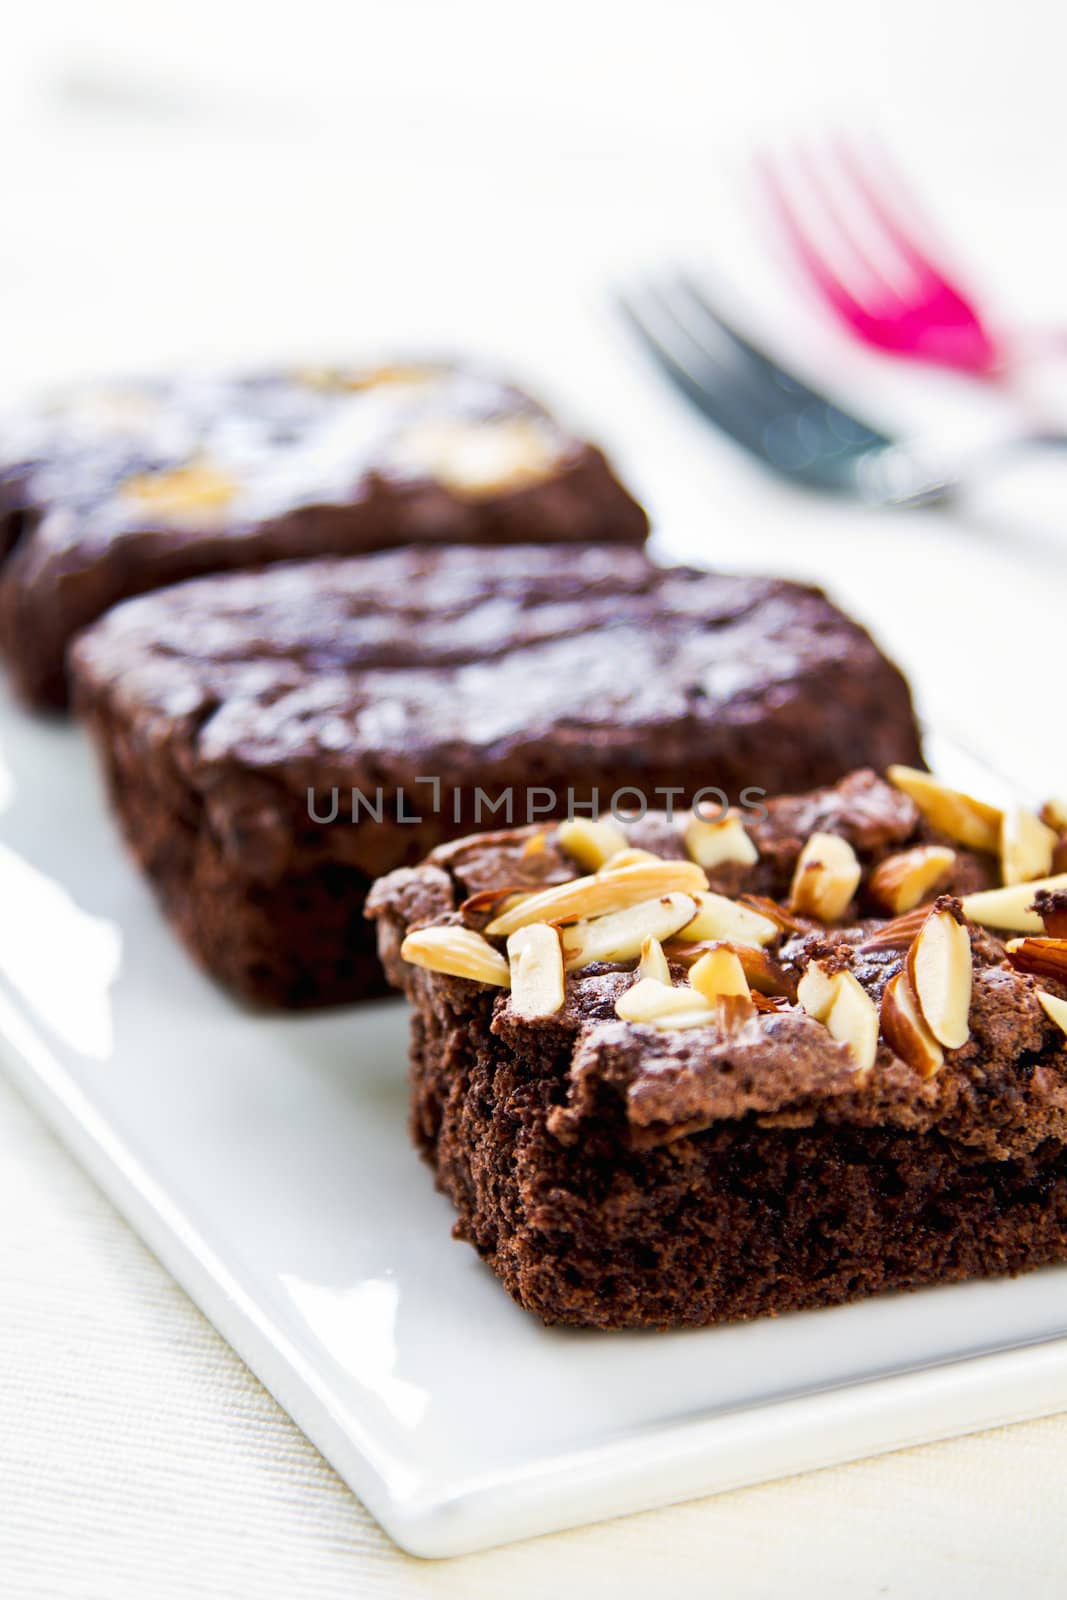 Brownies with almond and white chocolate topping